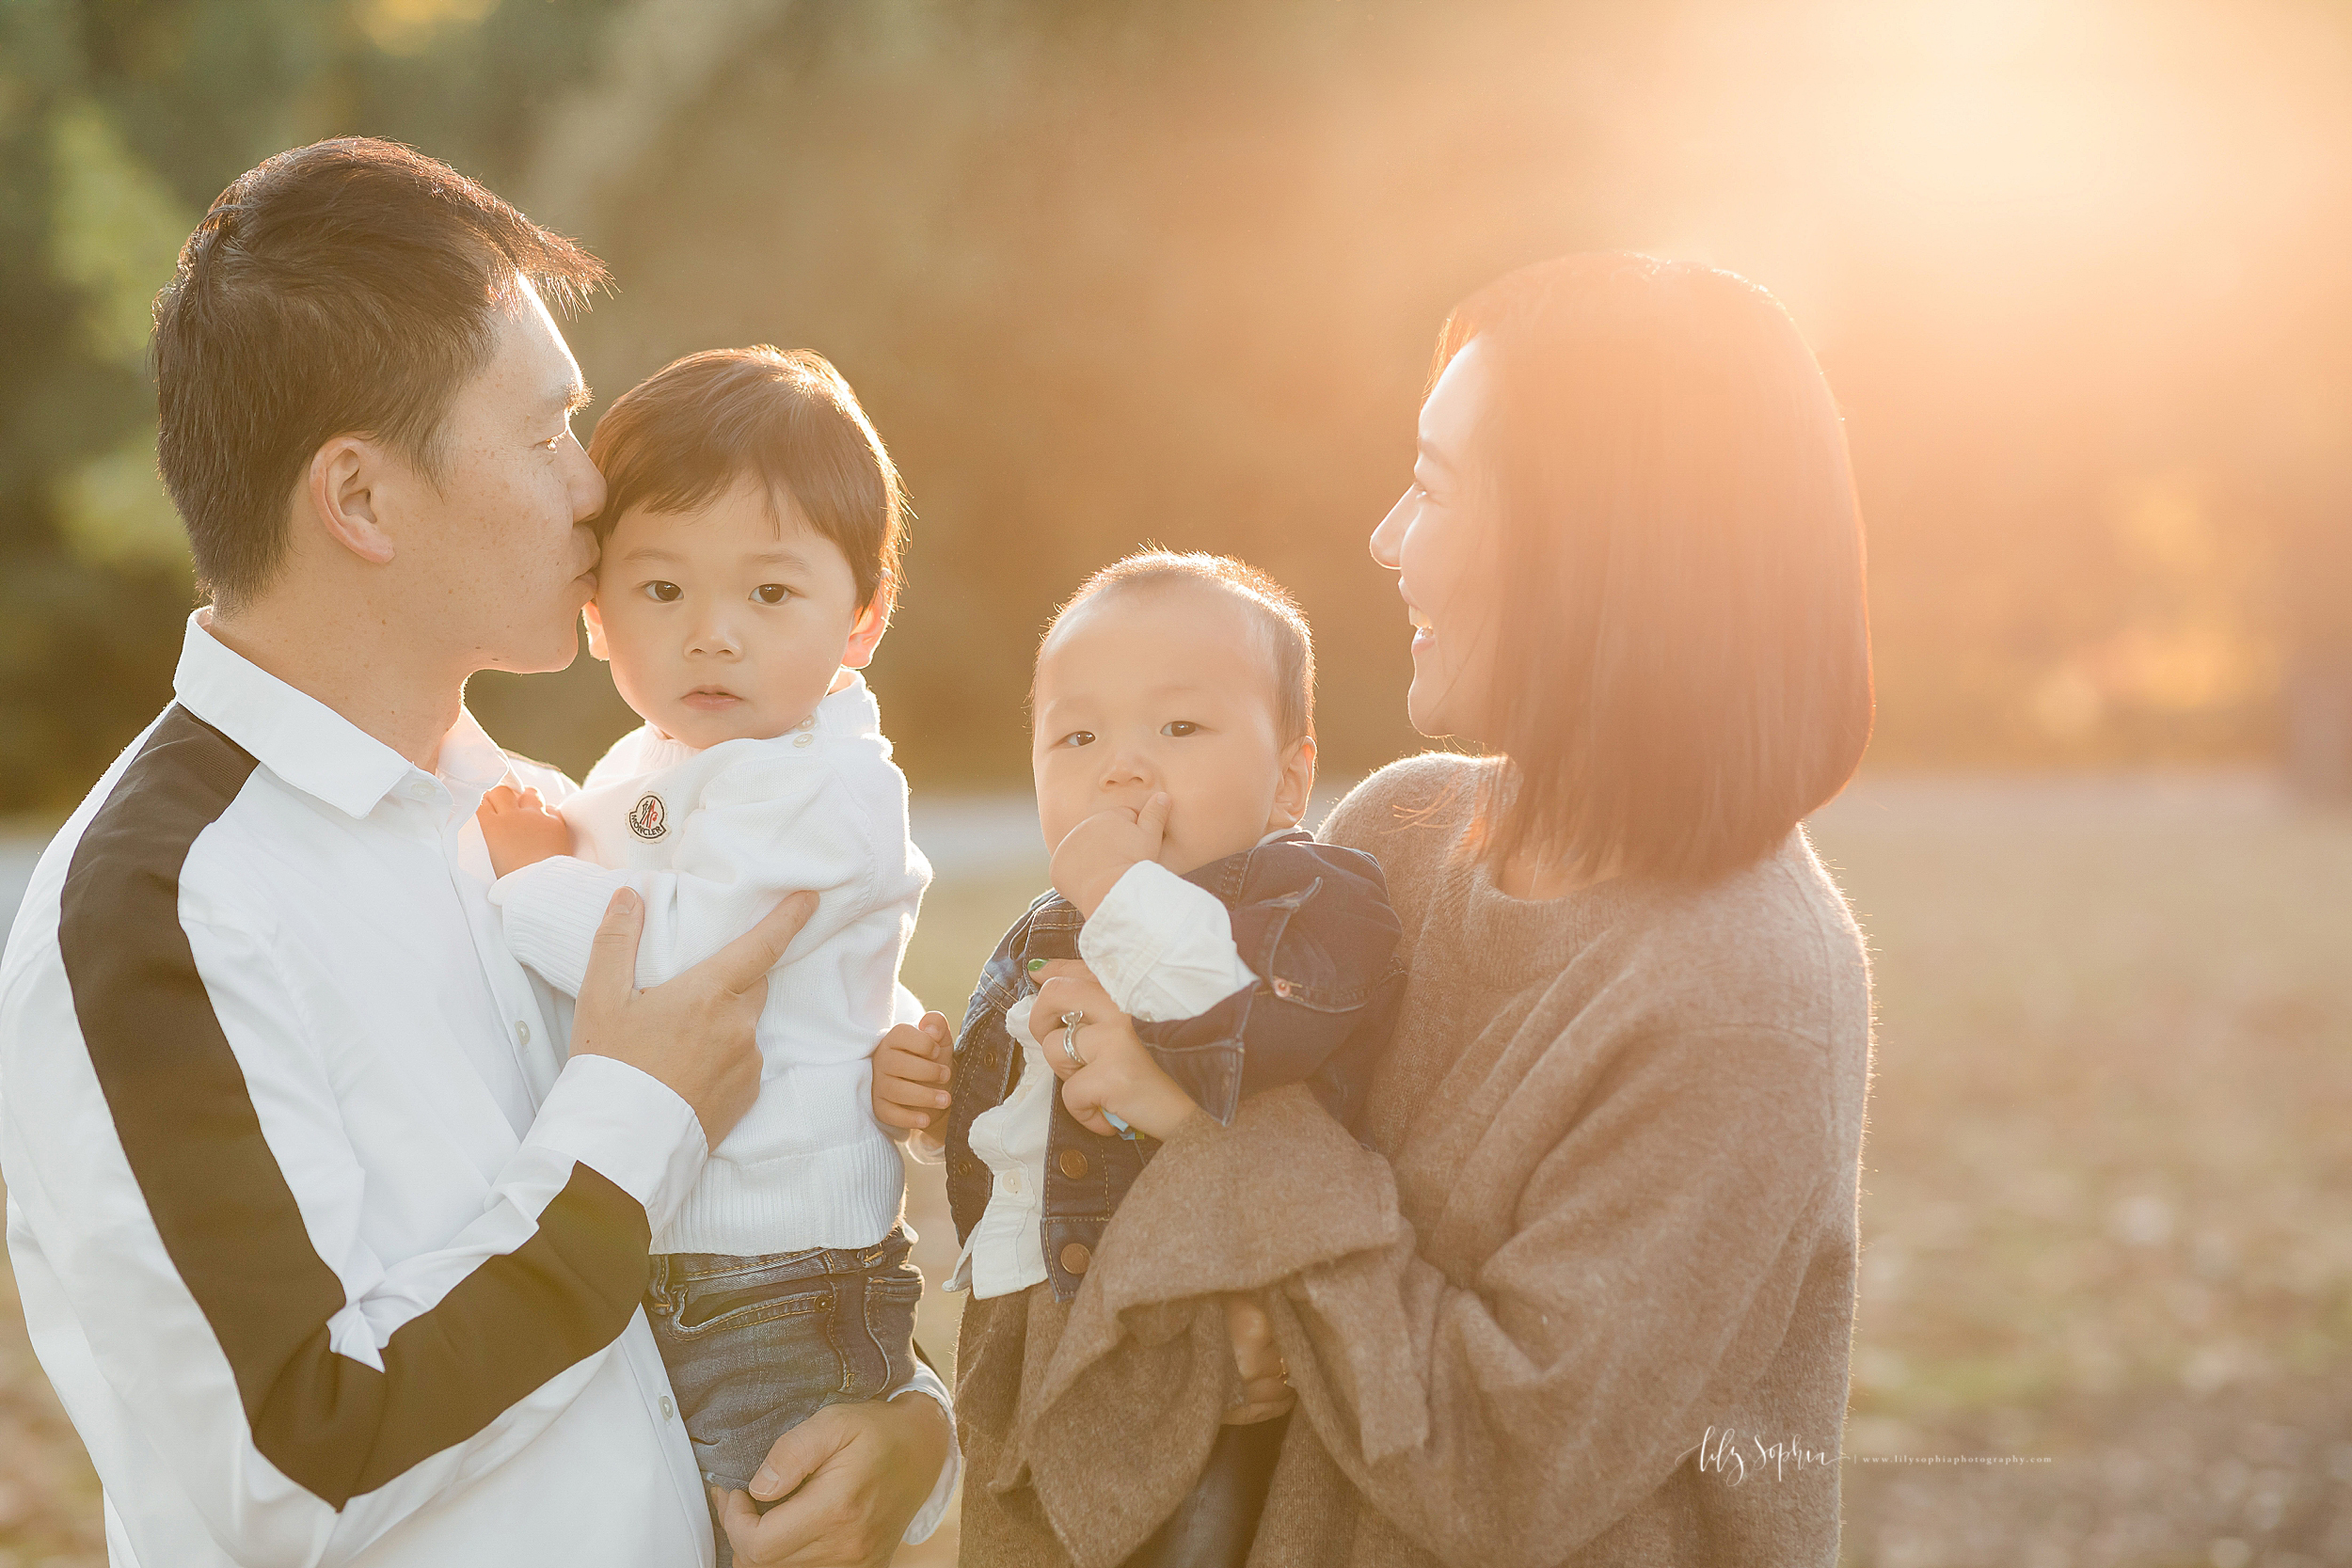 atlanta-buckhead-brookhaven-decatur-lily-sophia-photography--photographer-portraits-grant-park-intown-park-sunset-first-birthday-cake-smash-one-year-old-outdoors-cool-asian-american-family_0080.jpg